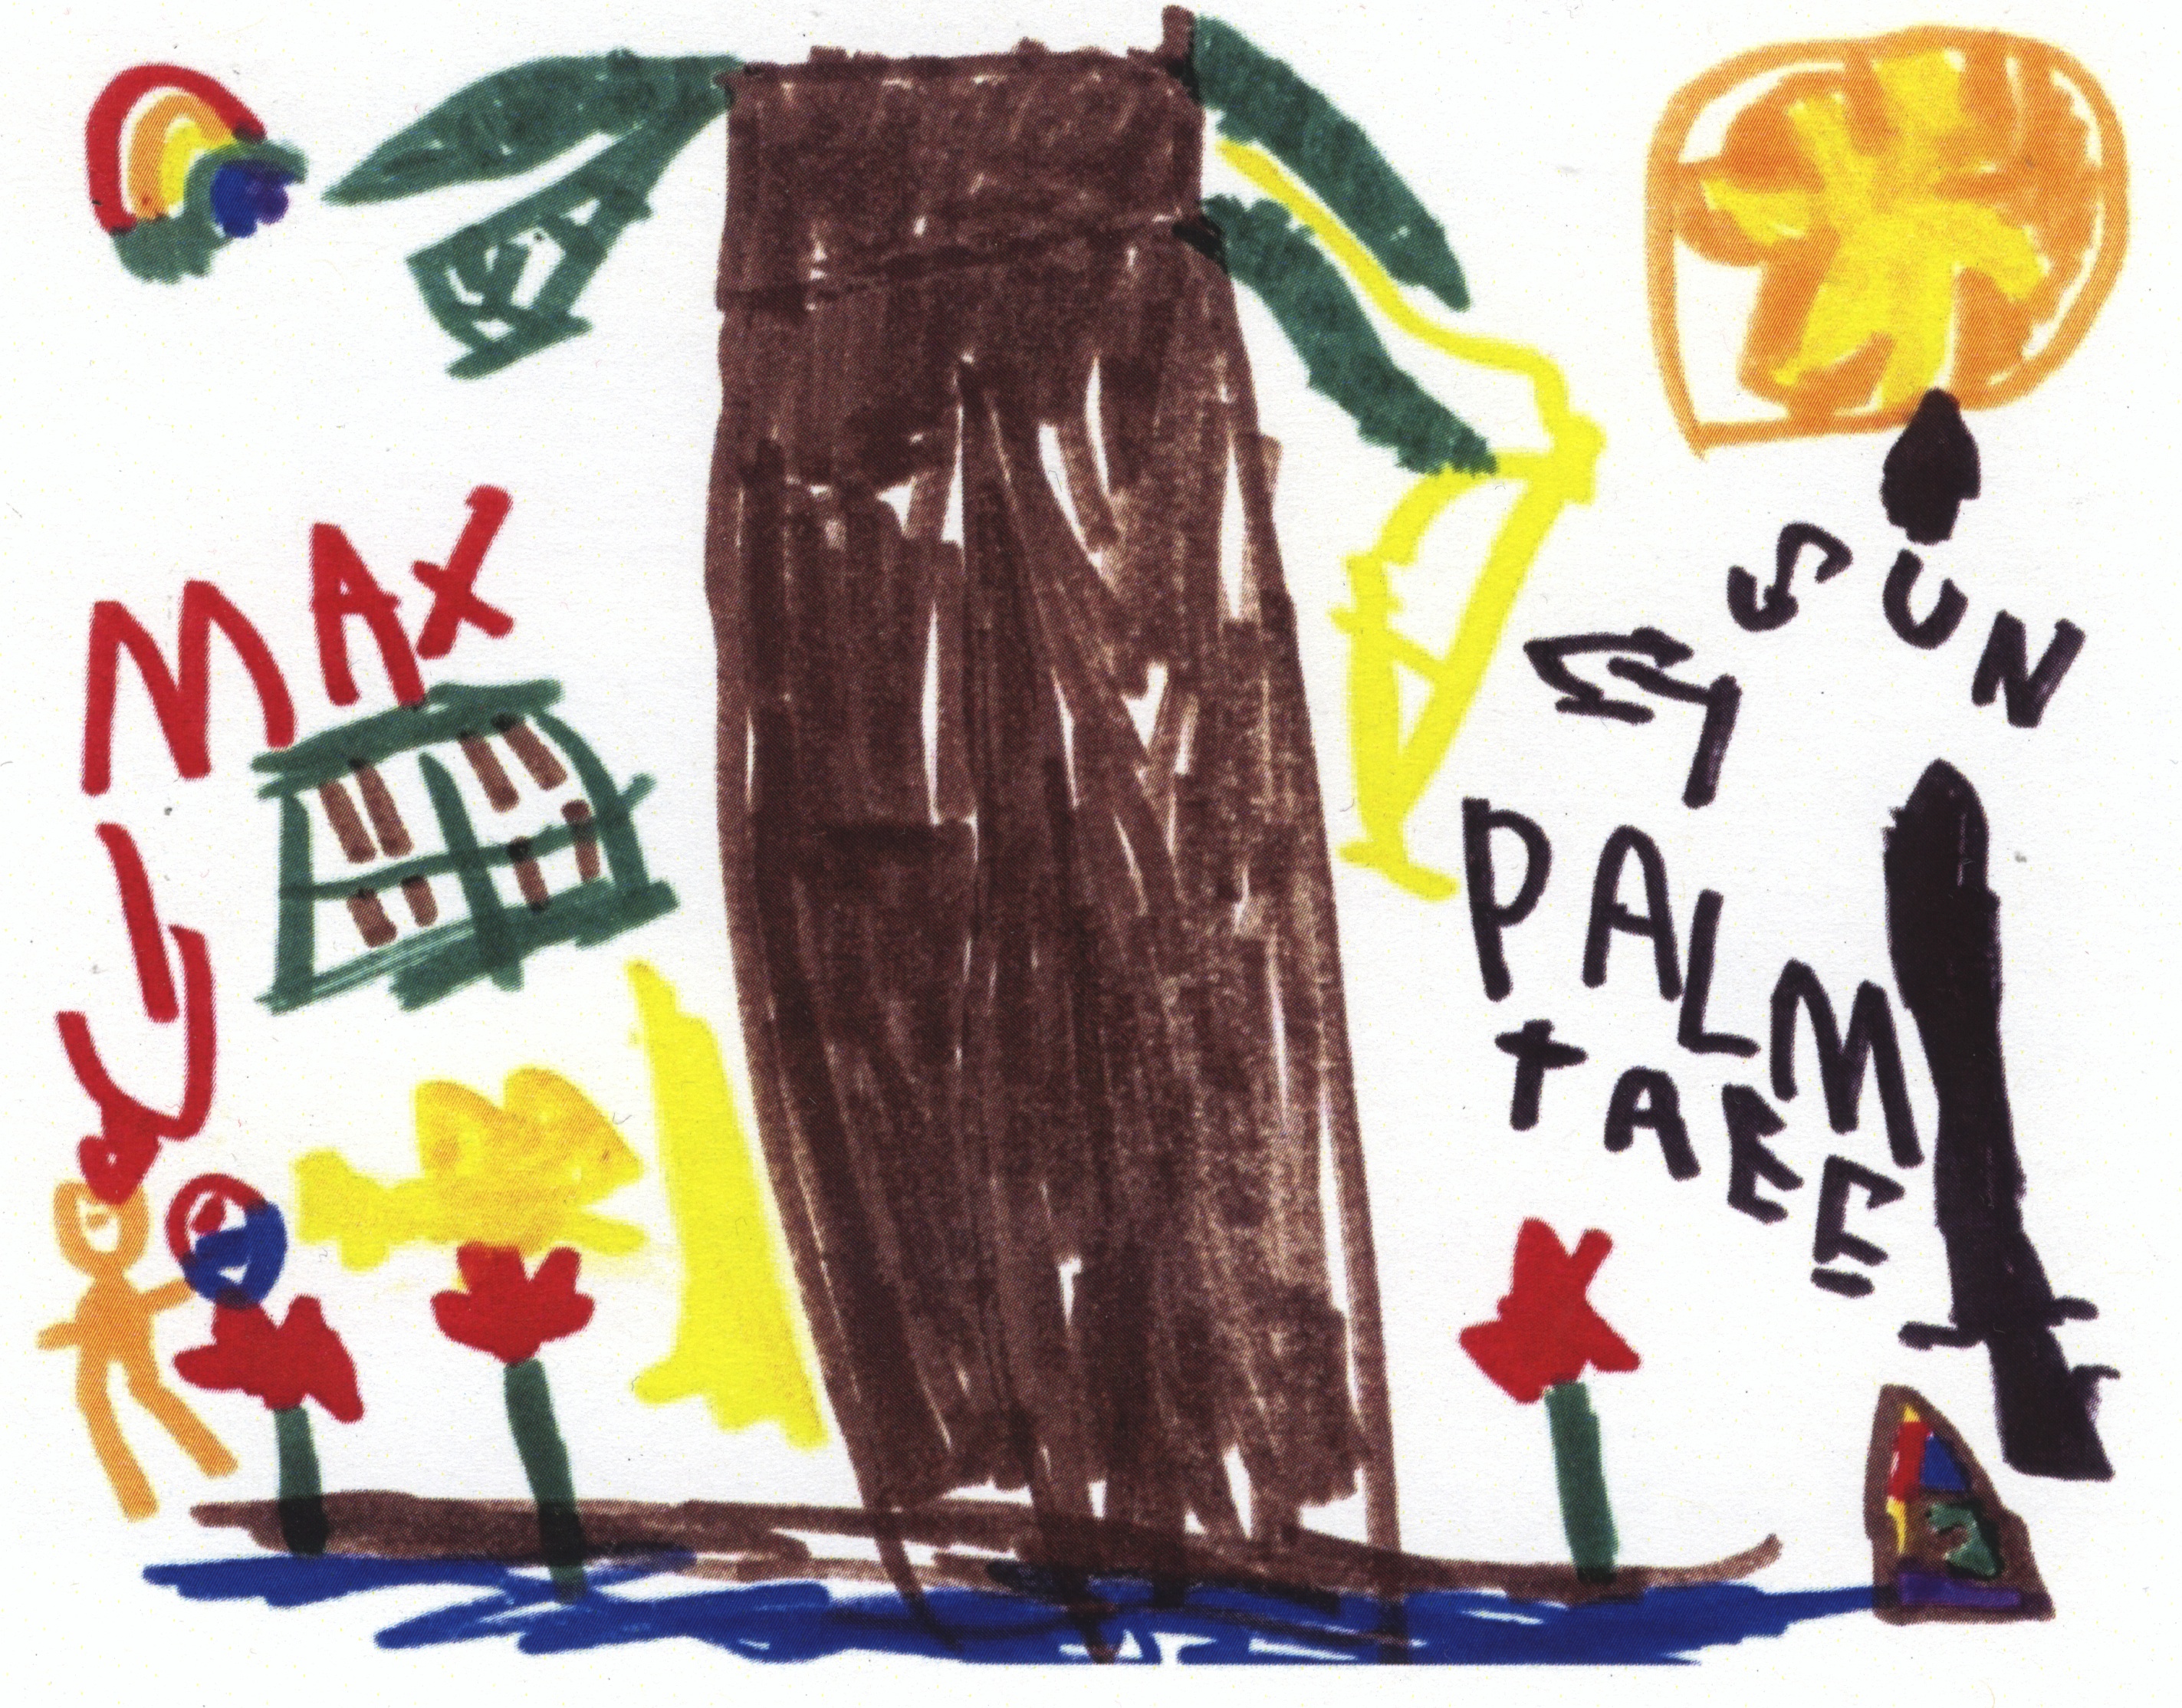 Max stands among some palm trees in the sun. Art by Max.